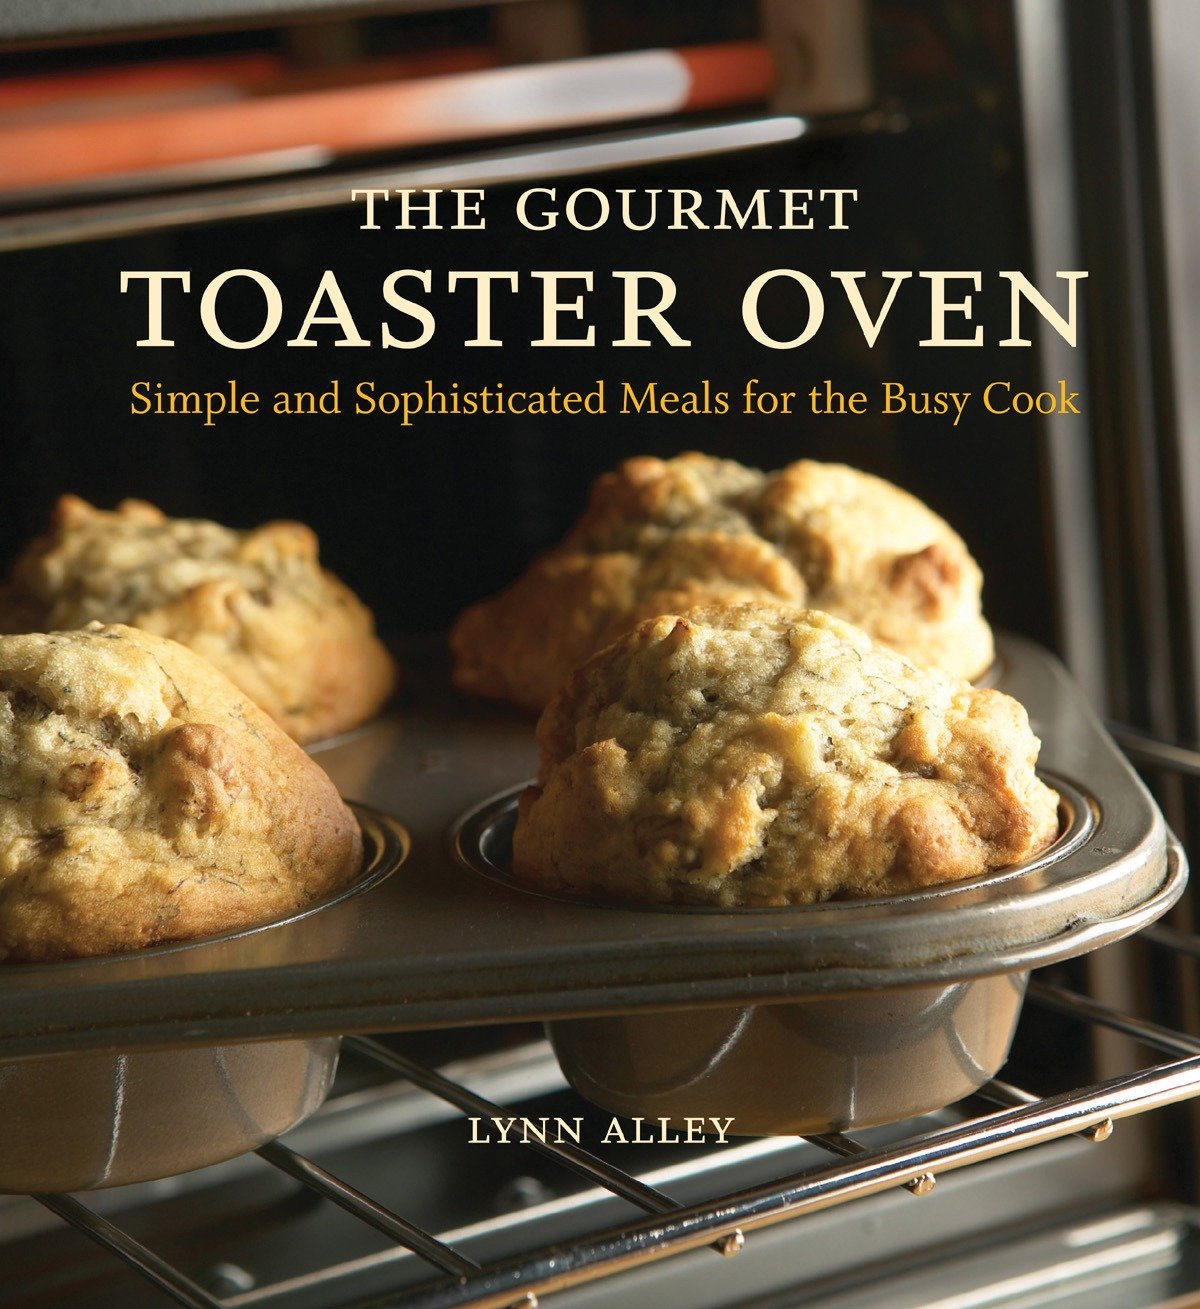 The Gourmet Toaster Oven : Simple and Sophisticated Meals for the Busy Cook (Paperback) - image 1 of 1